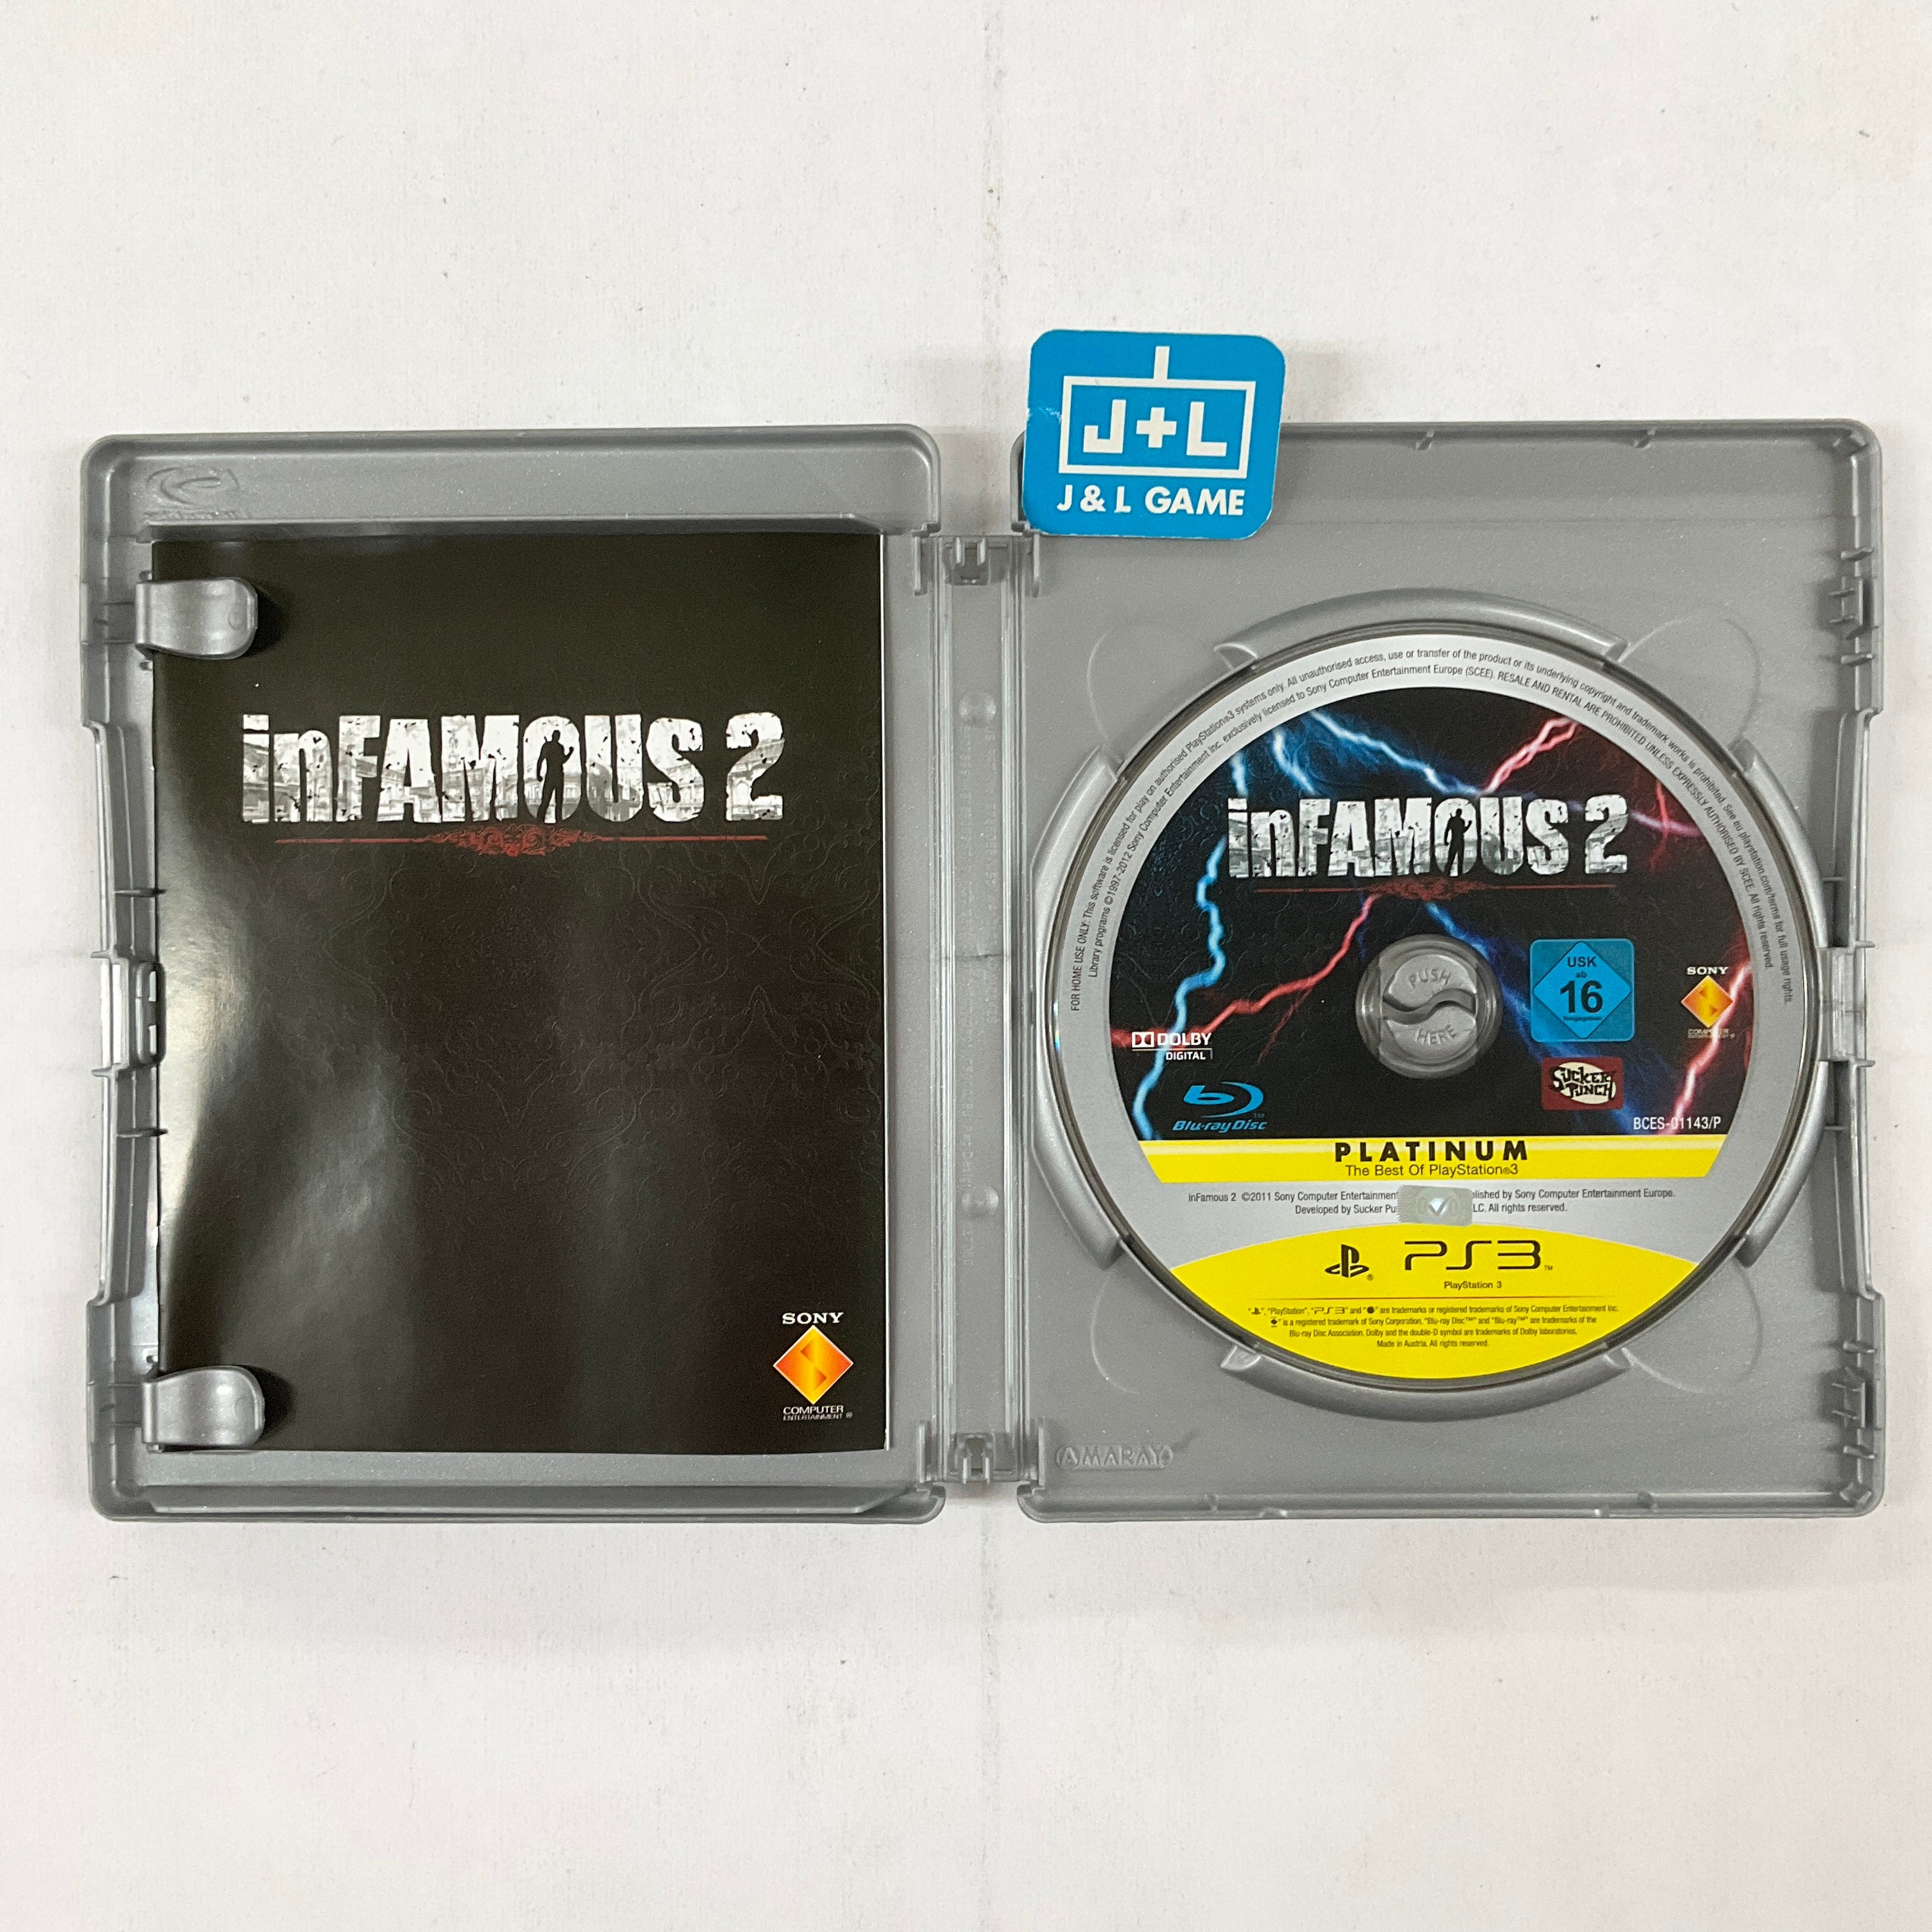 inFamous 2 (Platinum Hits) - (PS3) PlayStation 3 [Pre-Owned] (European Import) Video Games SCEA   